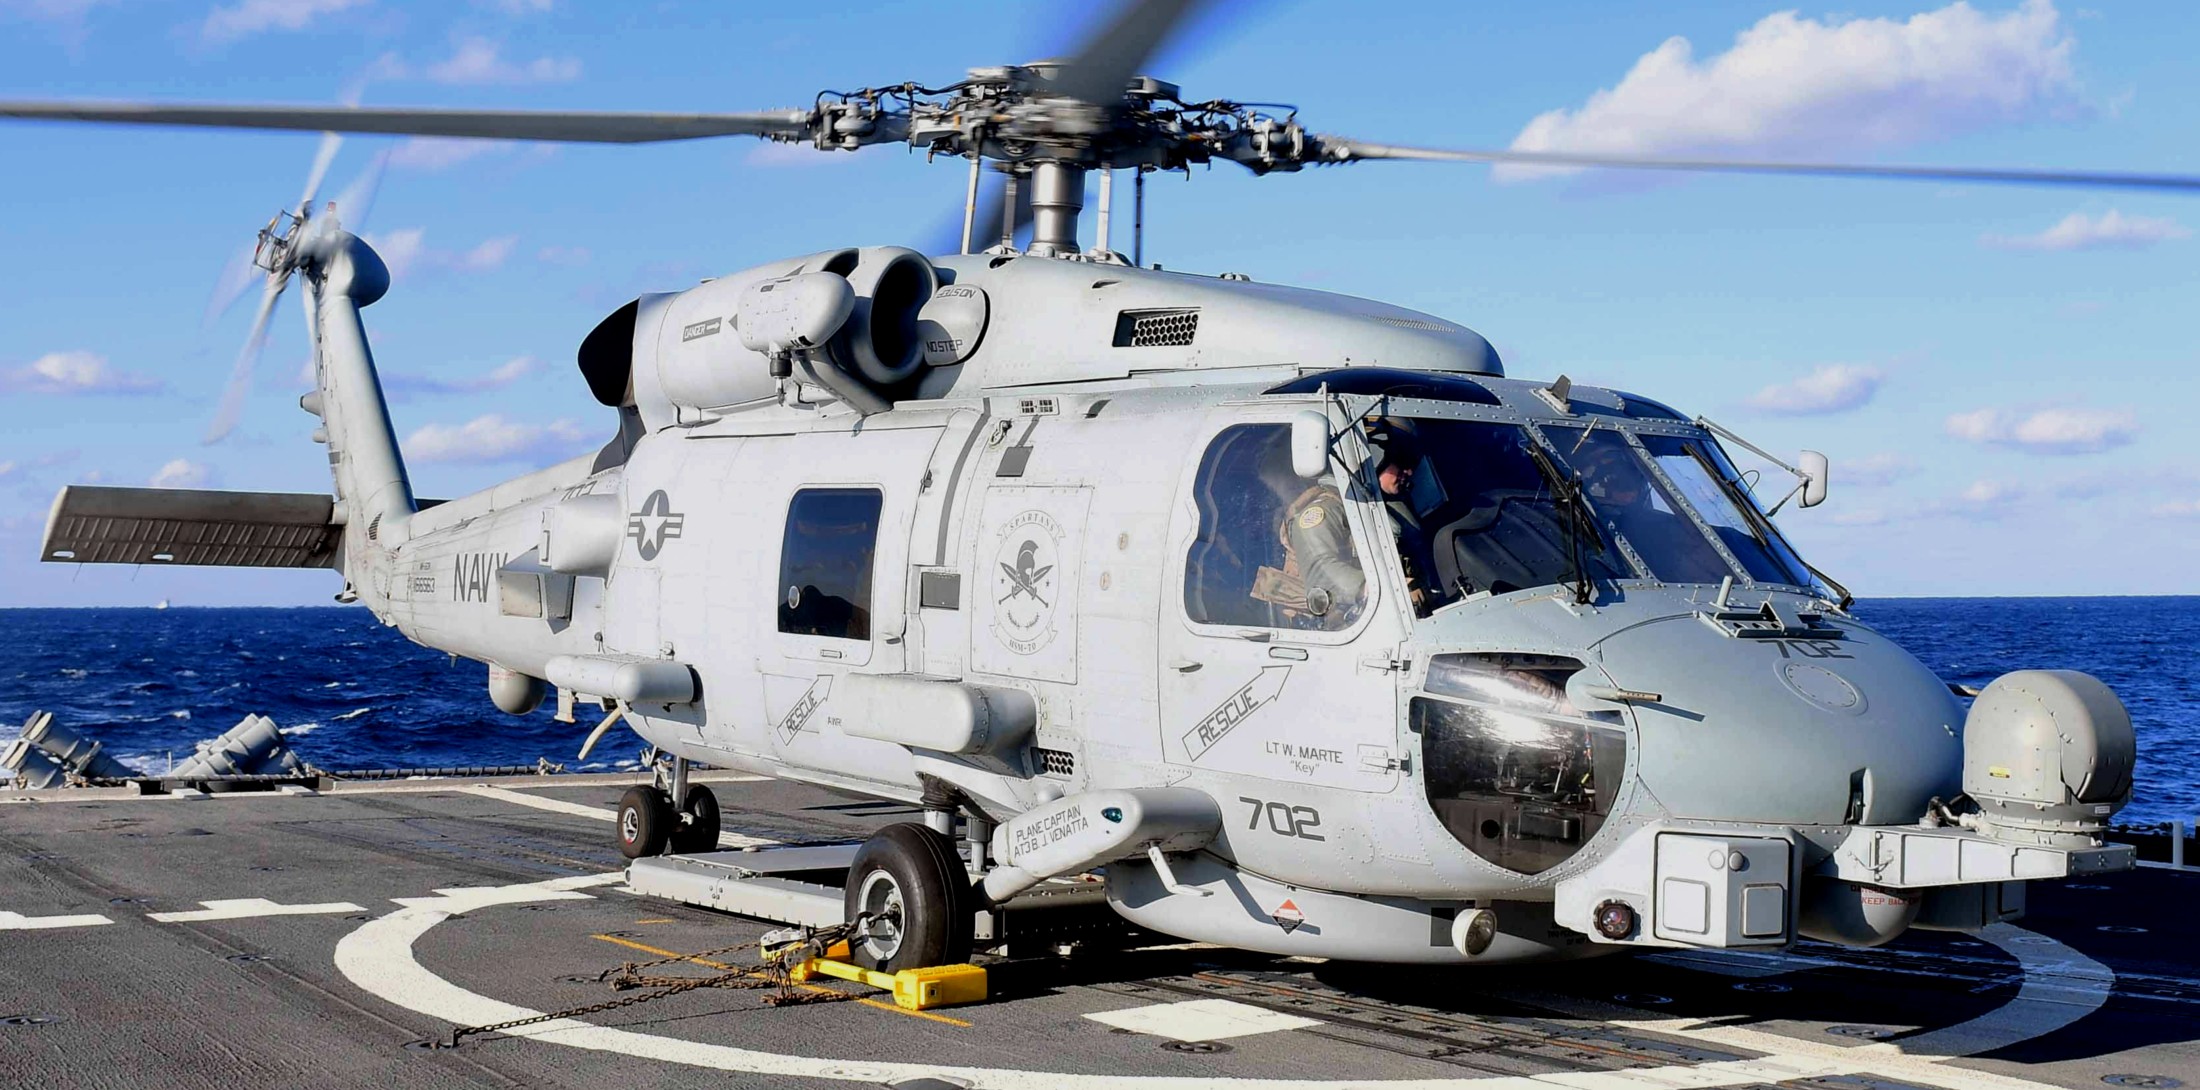 hsm-70 spartans helicopter maritime strike squadron mh-60r seahawk 2016 83